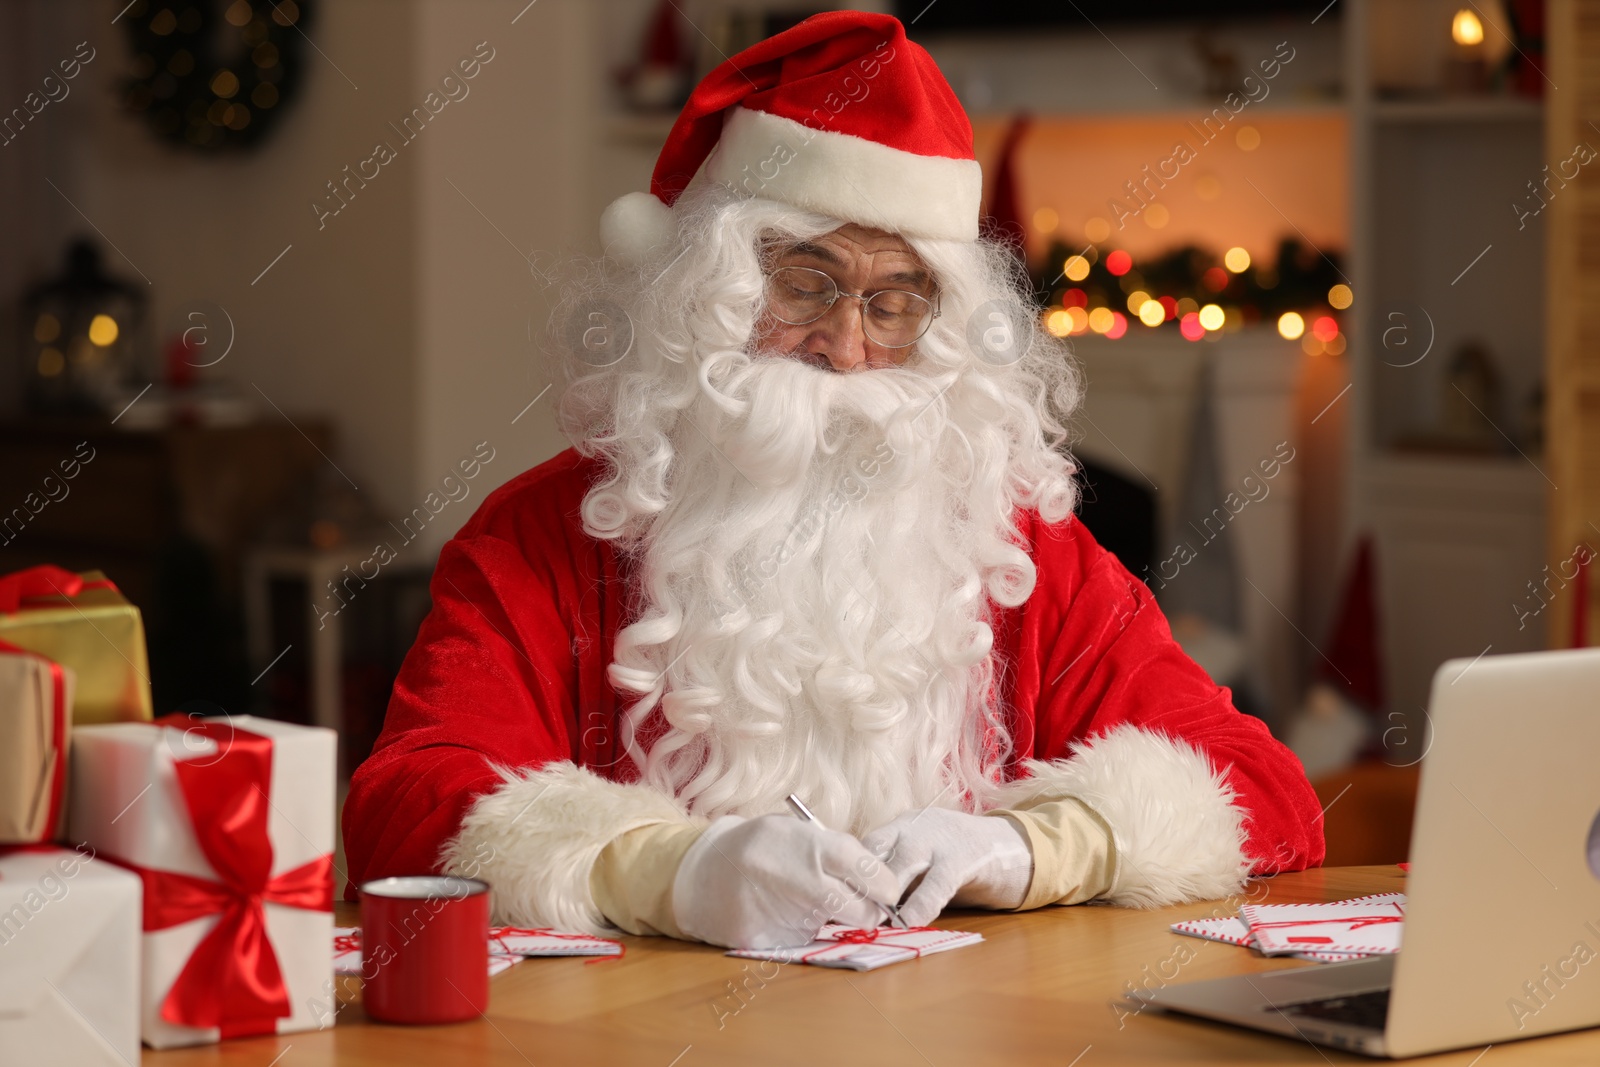 Photo of Santa Claus signing Christmas letters at table in room